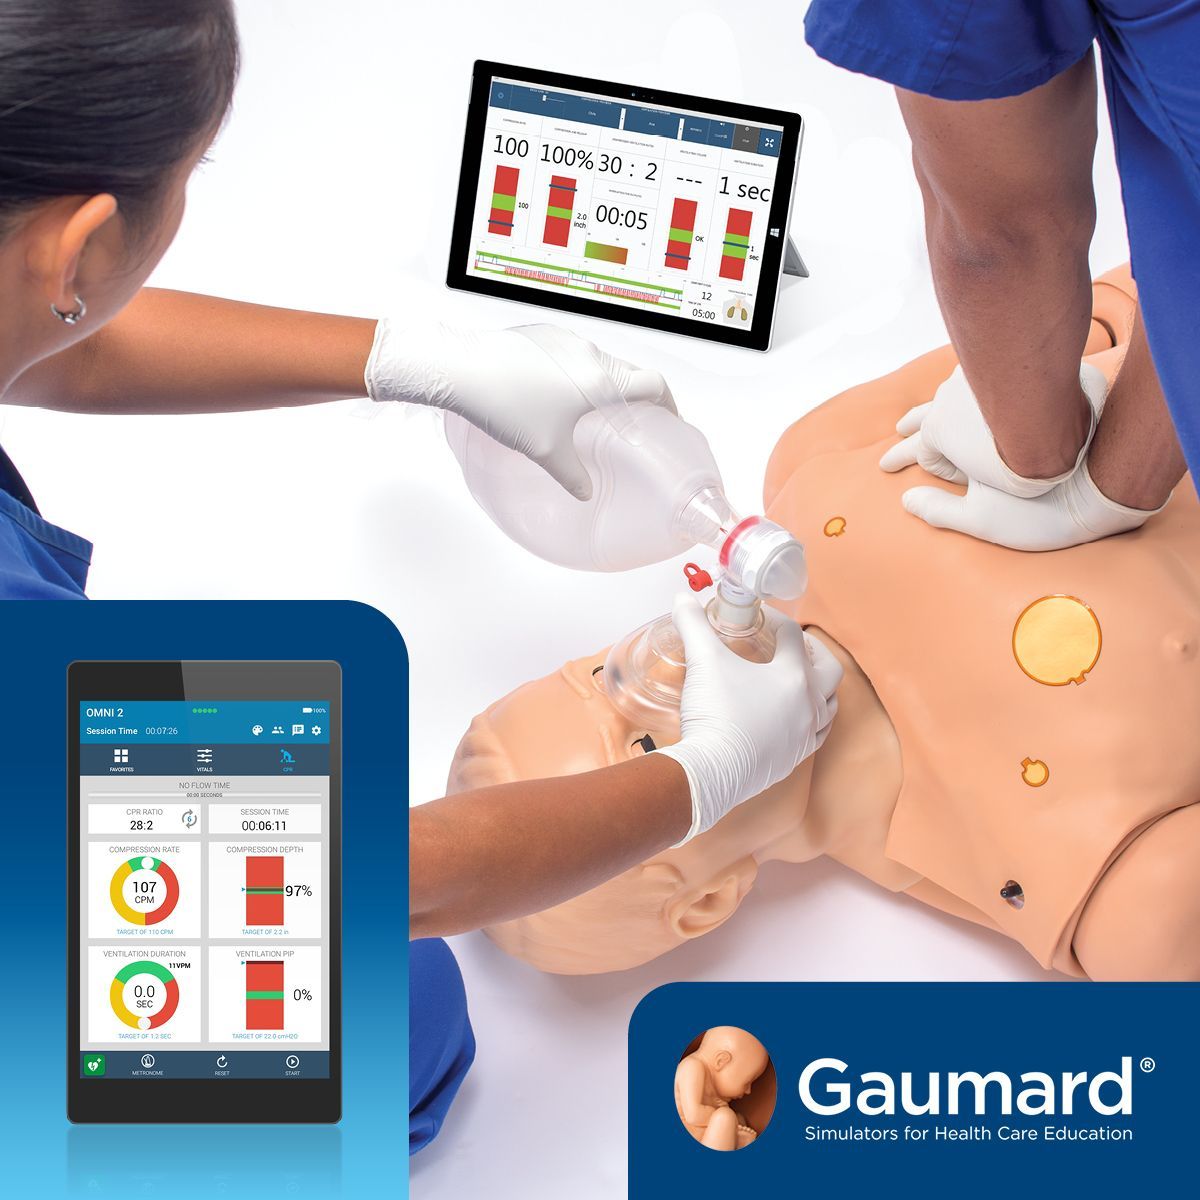 #DYK? Nearly 108K Americans died of drug overdoses in 2022. Rapid, effective emergency care is crucial. Code Blue III simulators enable hands-on training in medication administration, CPR, and safe procedures through realistic scenarios. Learn more: buff.ly/3xRI7gy